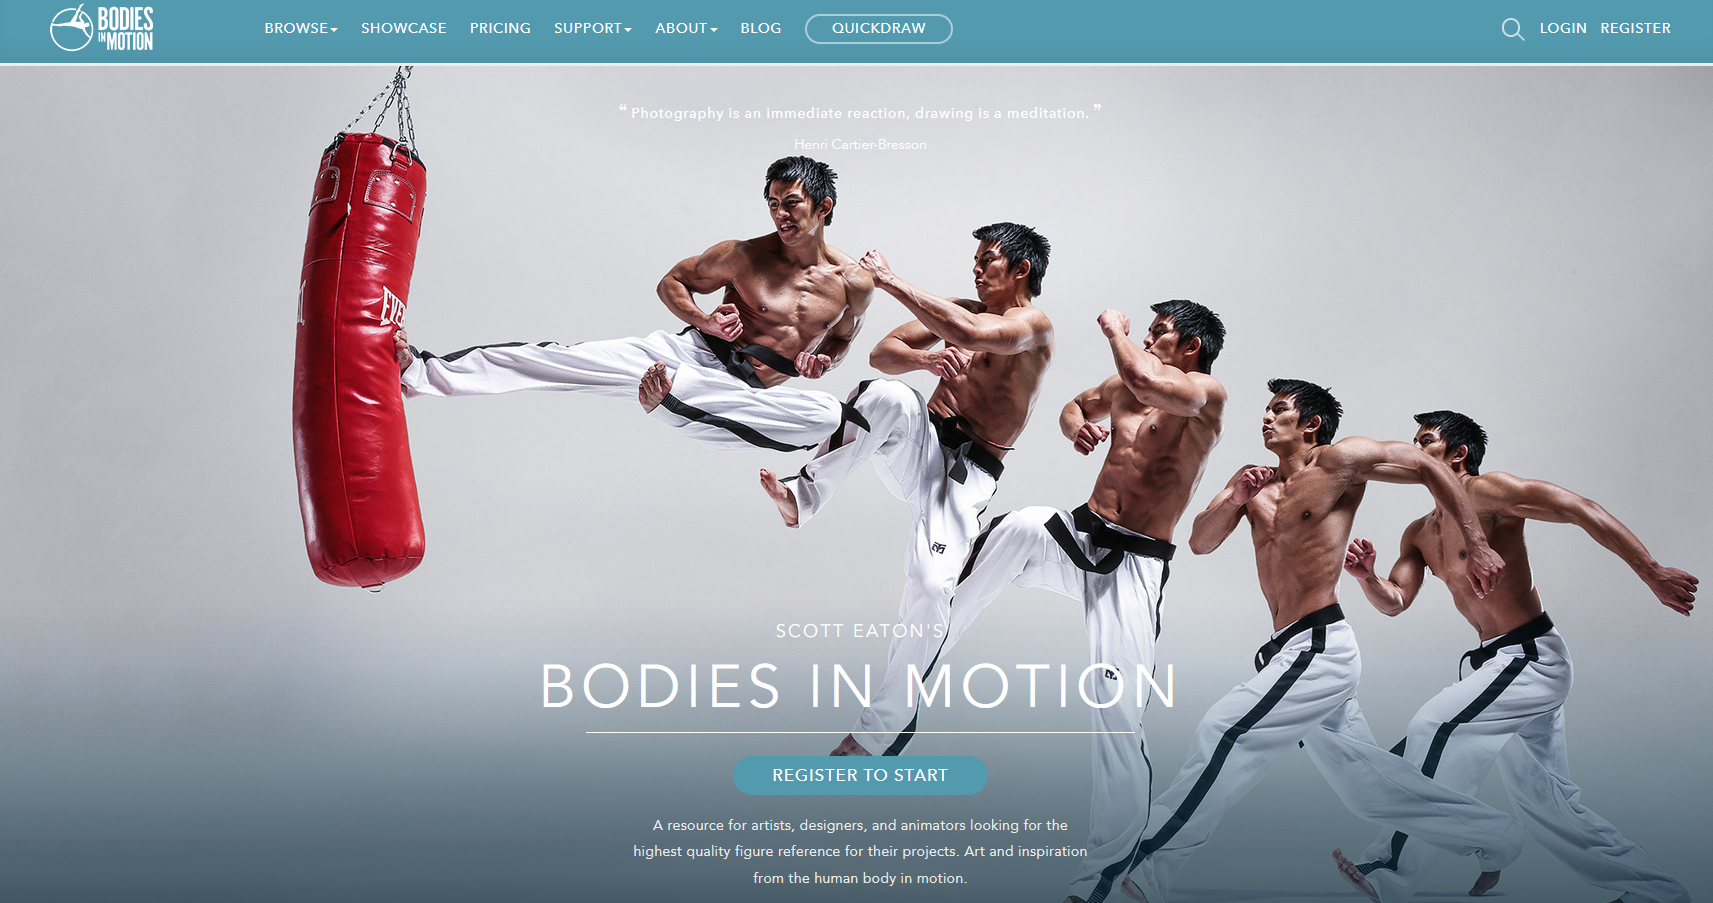 Bodies In Motion "Walking-Locomotion" Collection Web Page